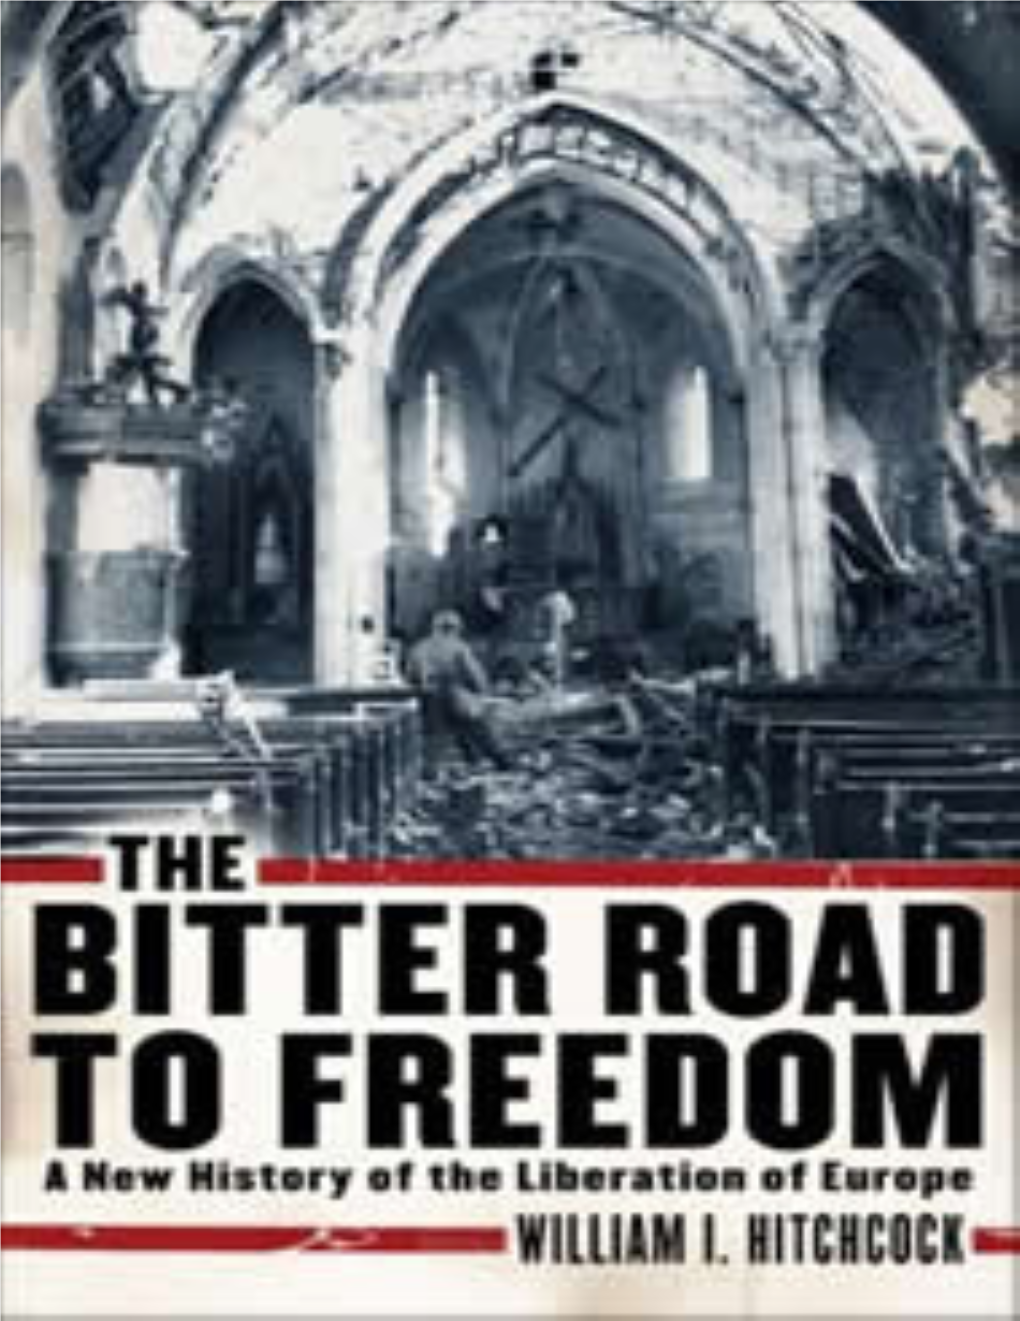 The Bitter Road to Freedom: a New History of the Liberation of Europe